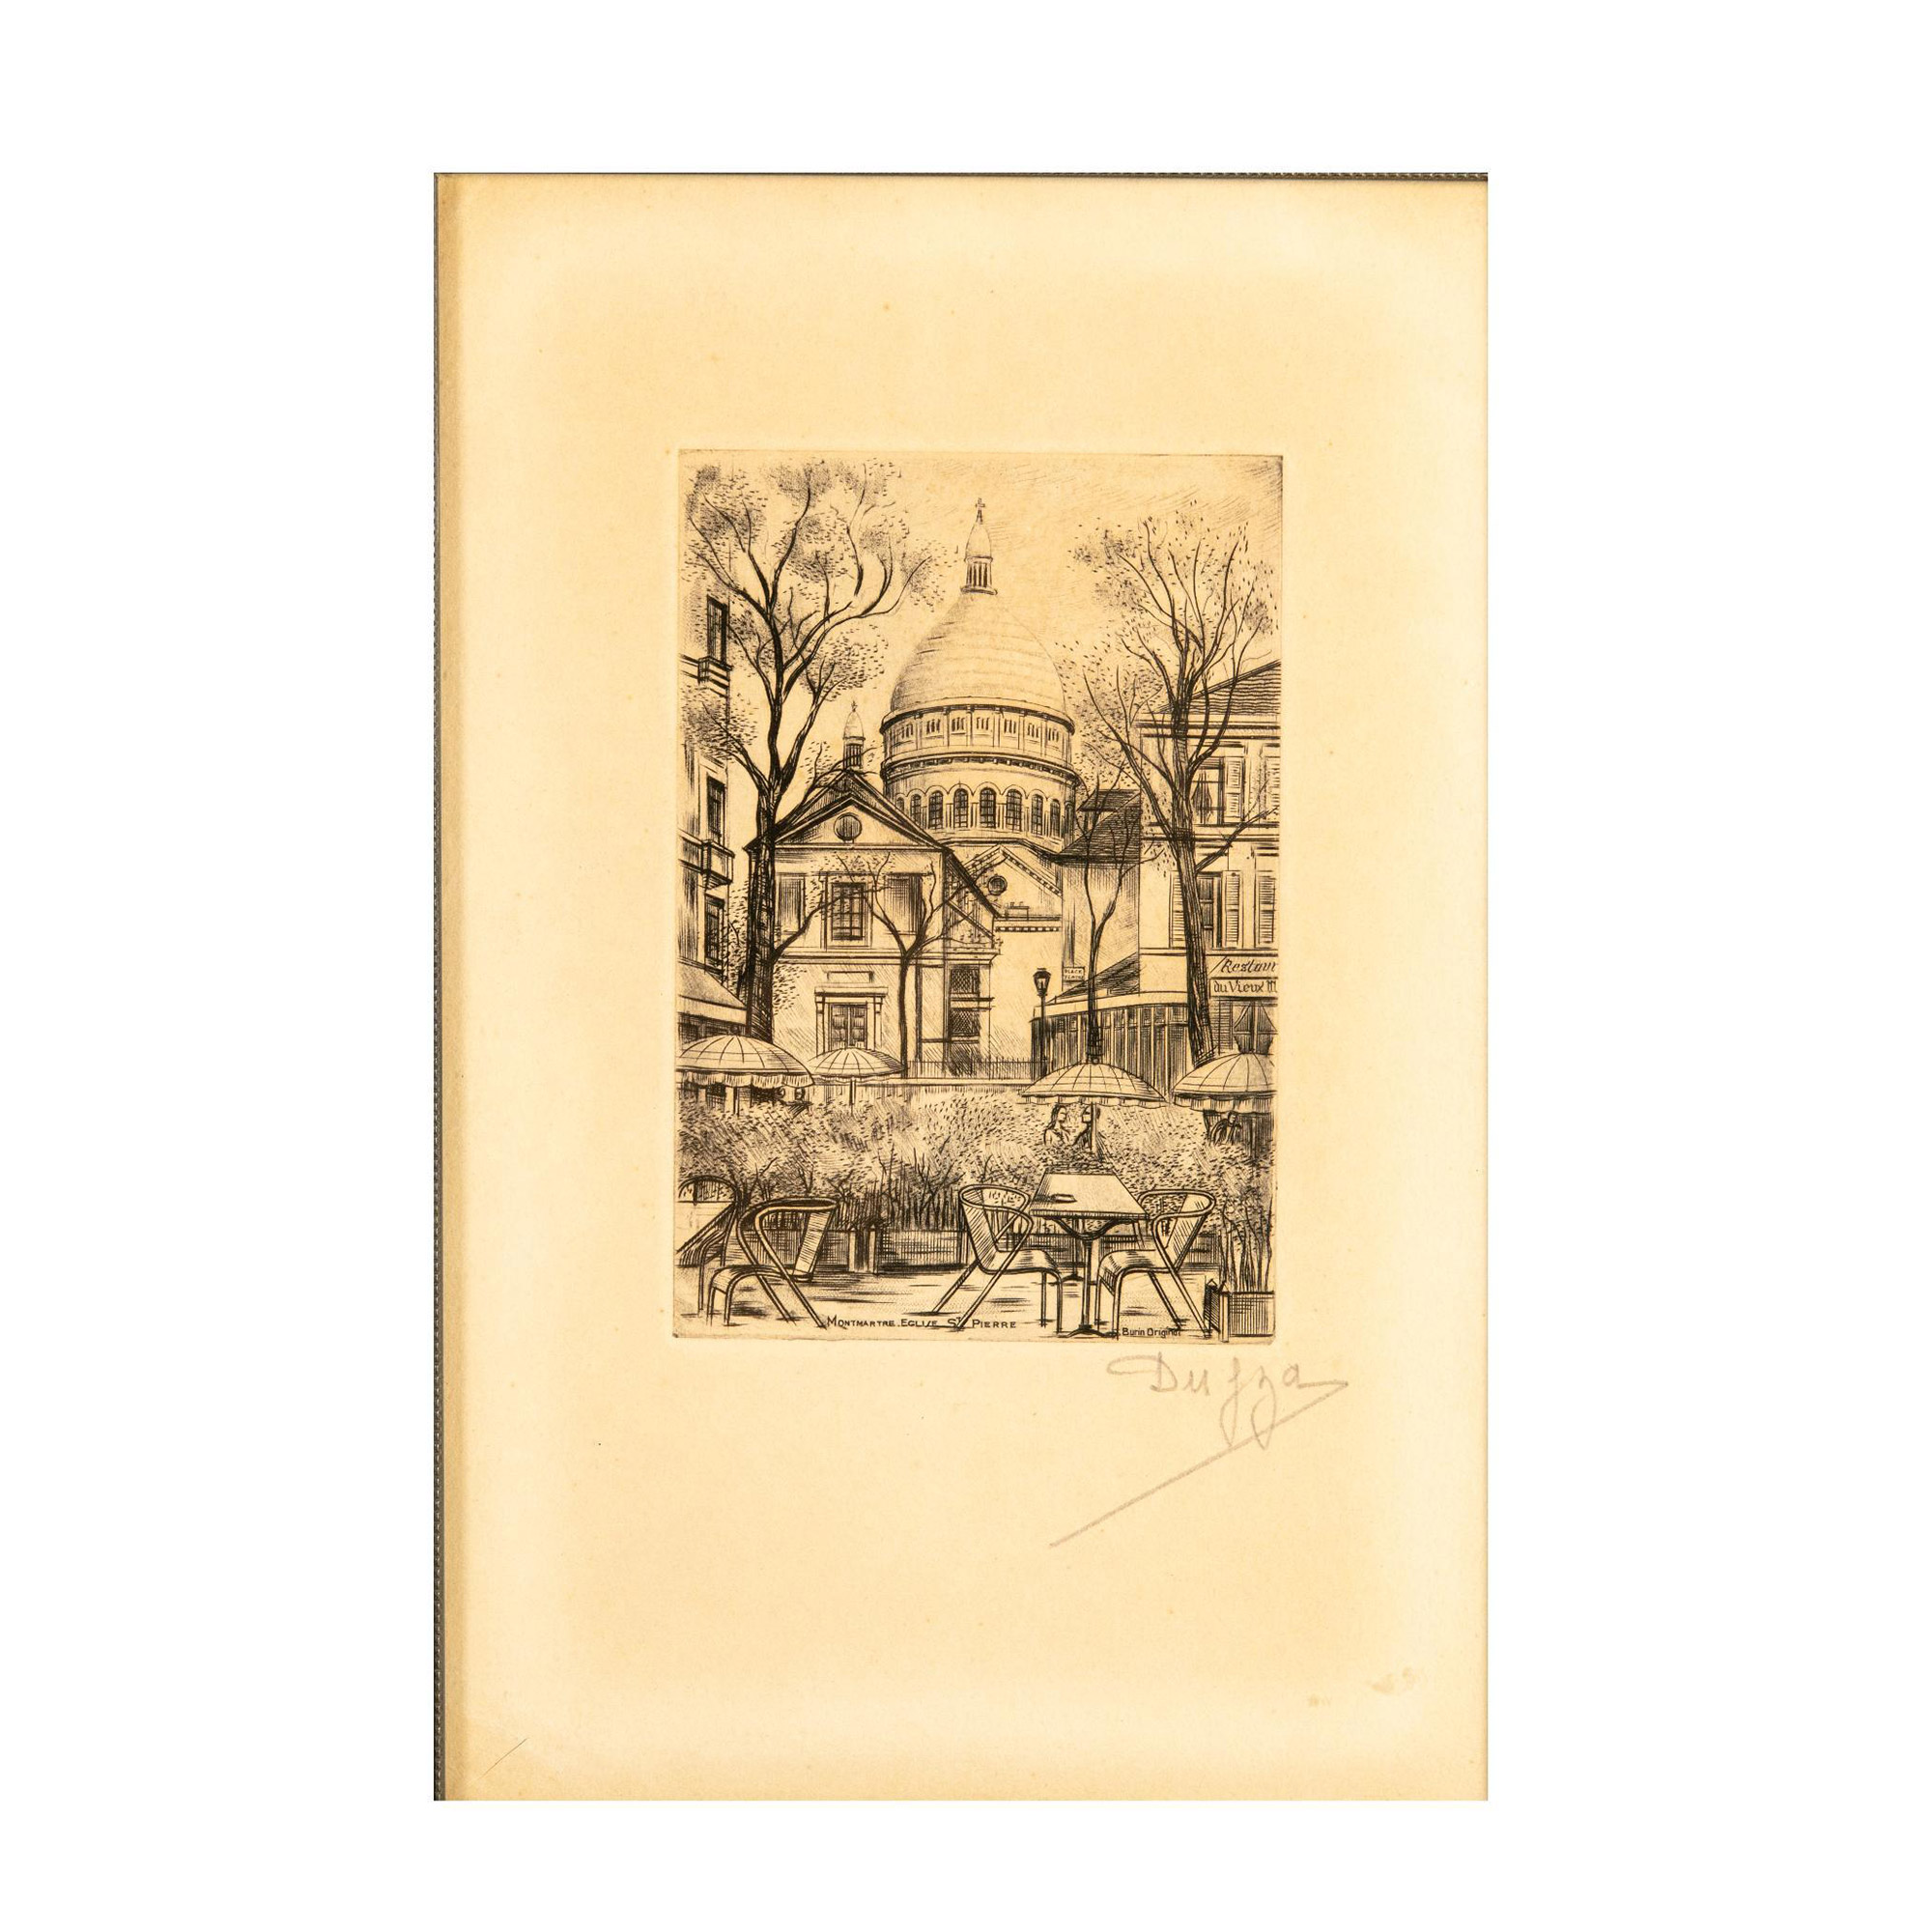 Dufza, Original Etching on Paper, Paris Cityscape Signed - Image 2 of 4